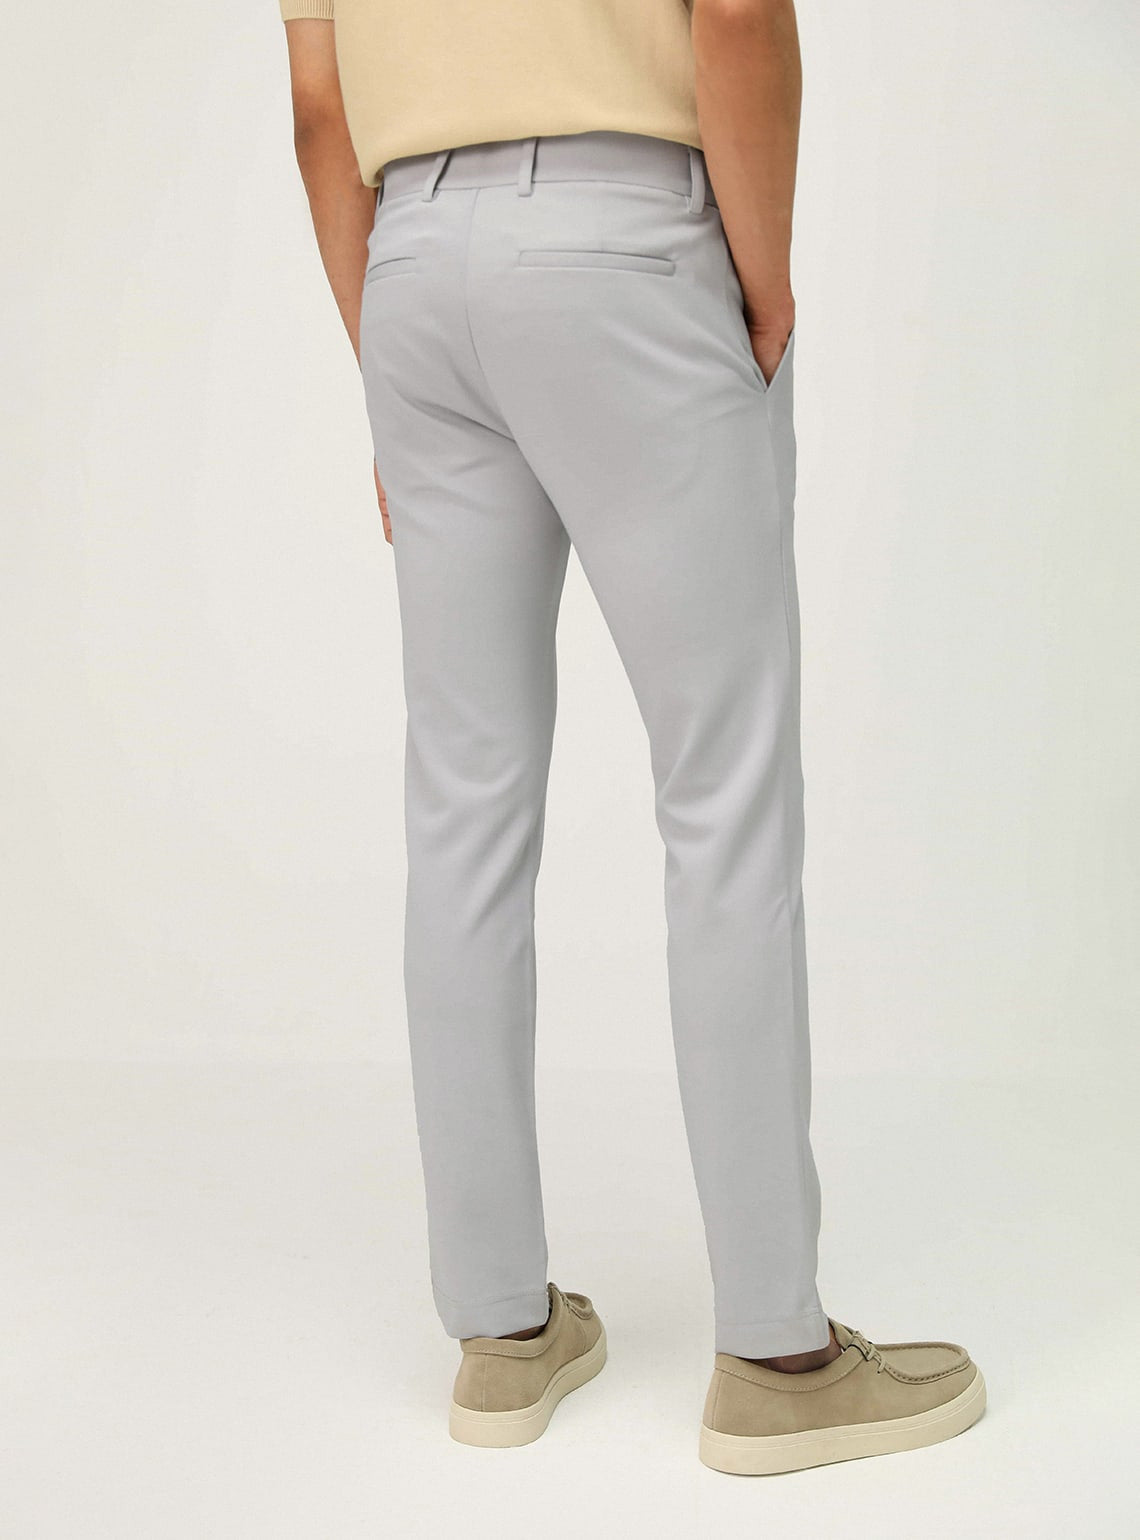 Silver Sand Trouser